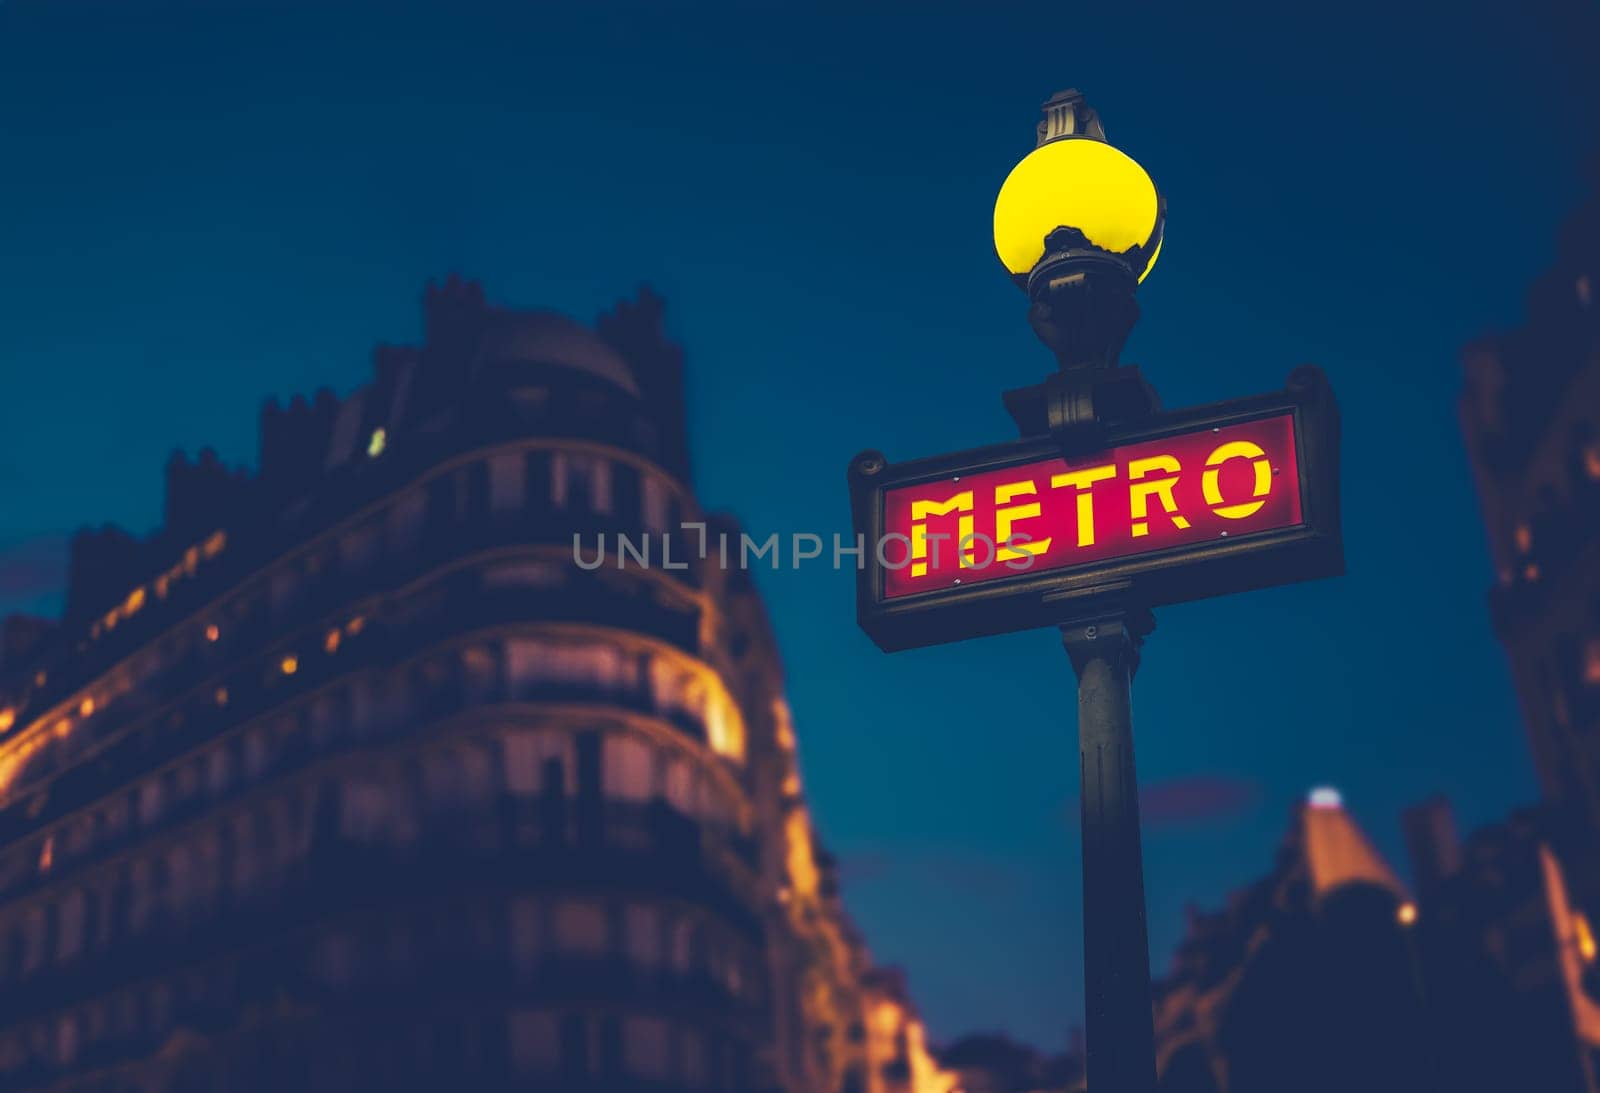 Metro Sign In A Residential Area Of Paris, France At Night